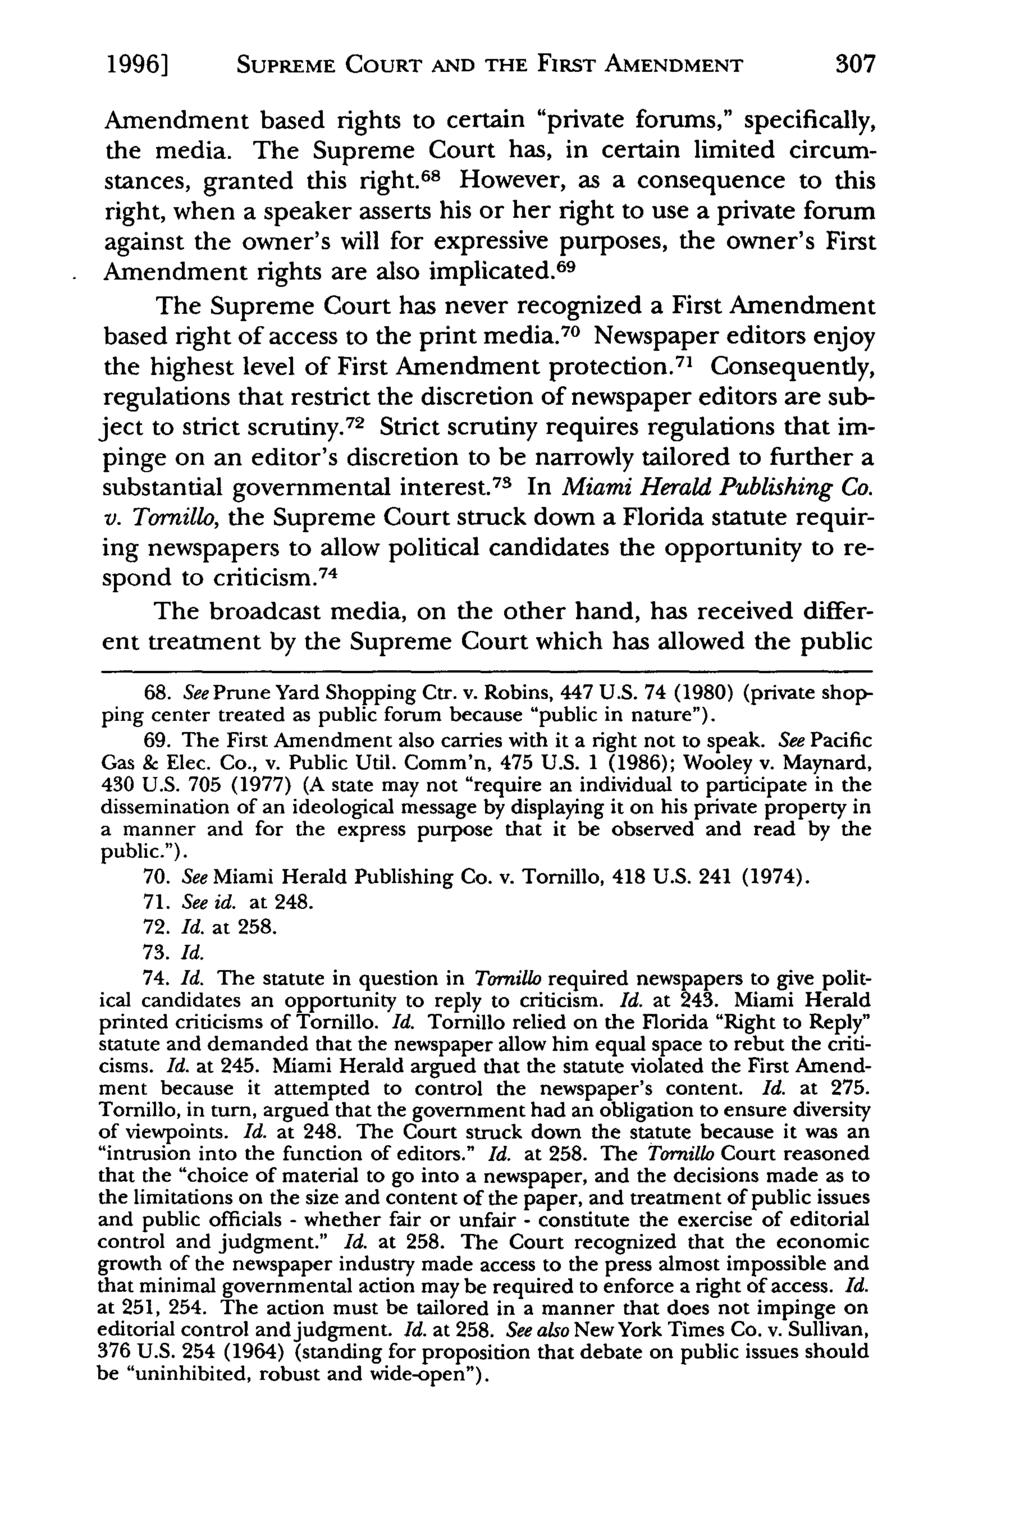 1996] Sands: SUPREME The Supreme COURT Court Turns AND Its THE Back on FIRST the First AMENDMENT Amendment, the 1992 Amendment based rights to certain "private forums," specifically, the media.